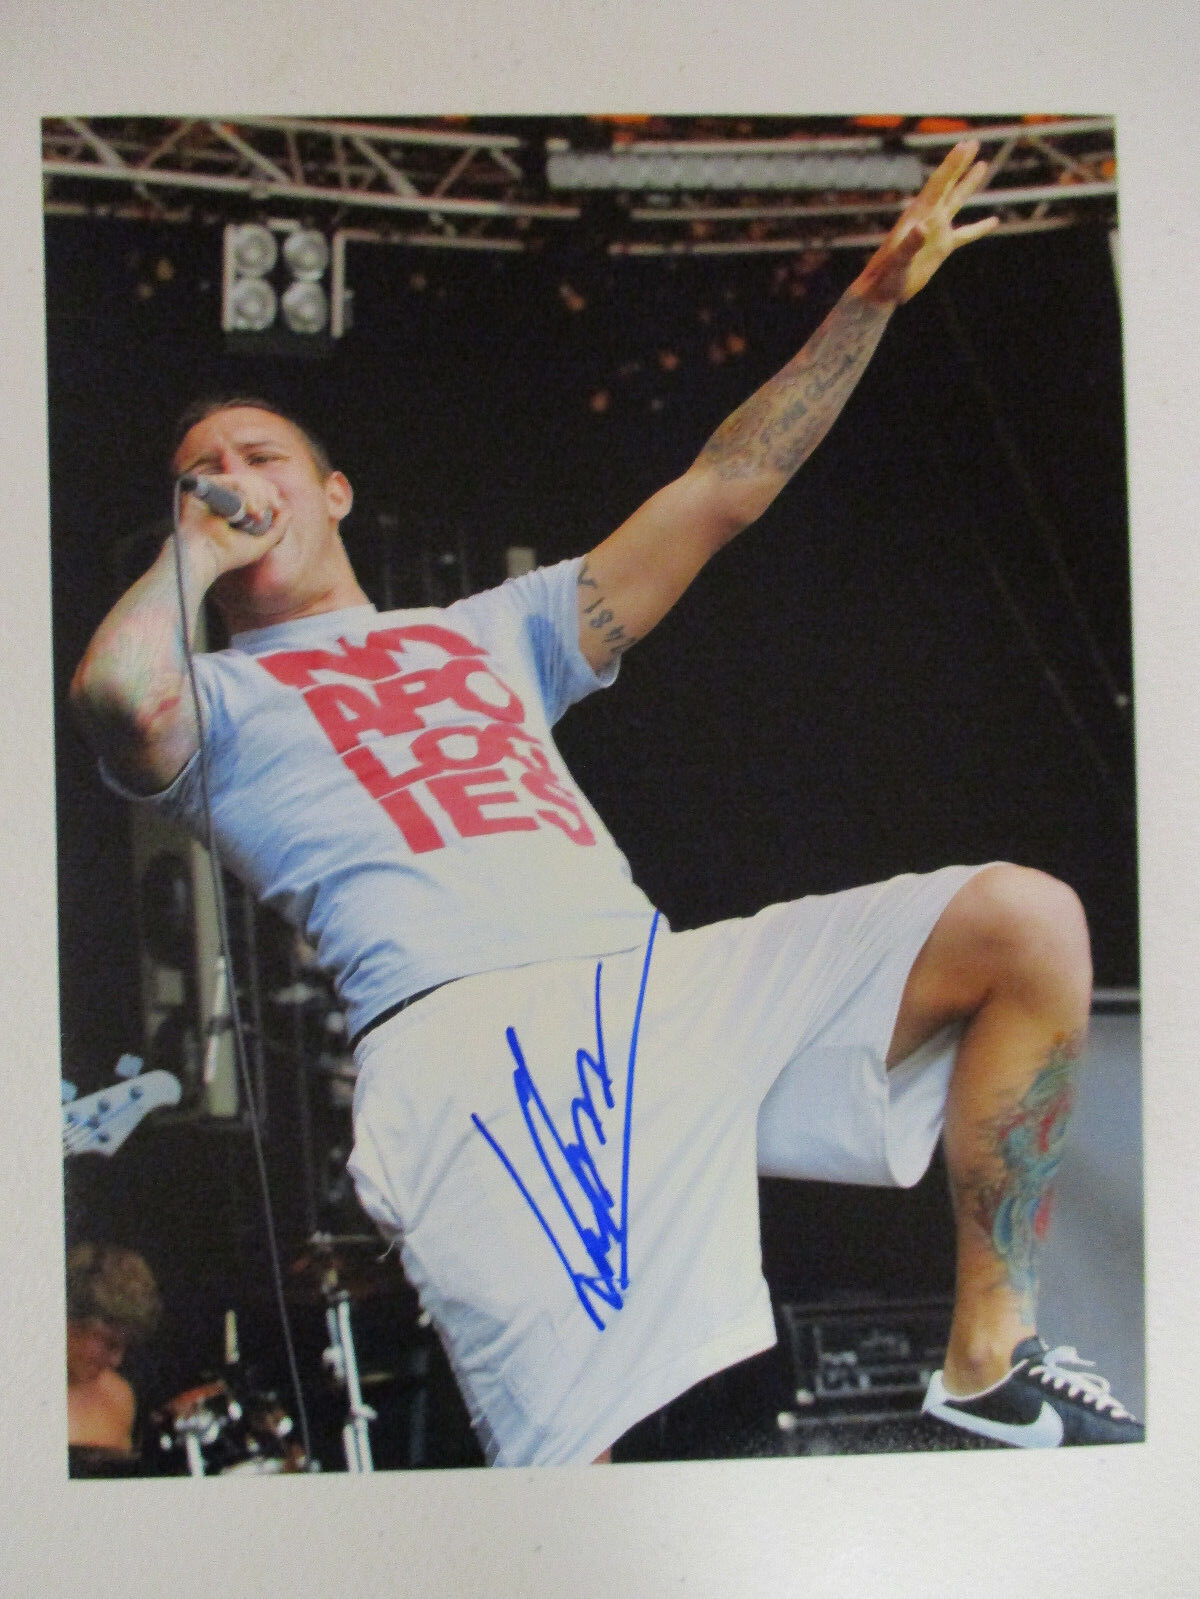 PARKWAY DRIVE WINSTON AUTOGRAPHED SIGNED Photo Poster painting 1 W/ EXACT SIGNING PICTURE PROOF